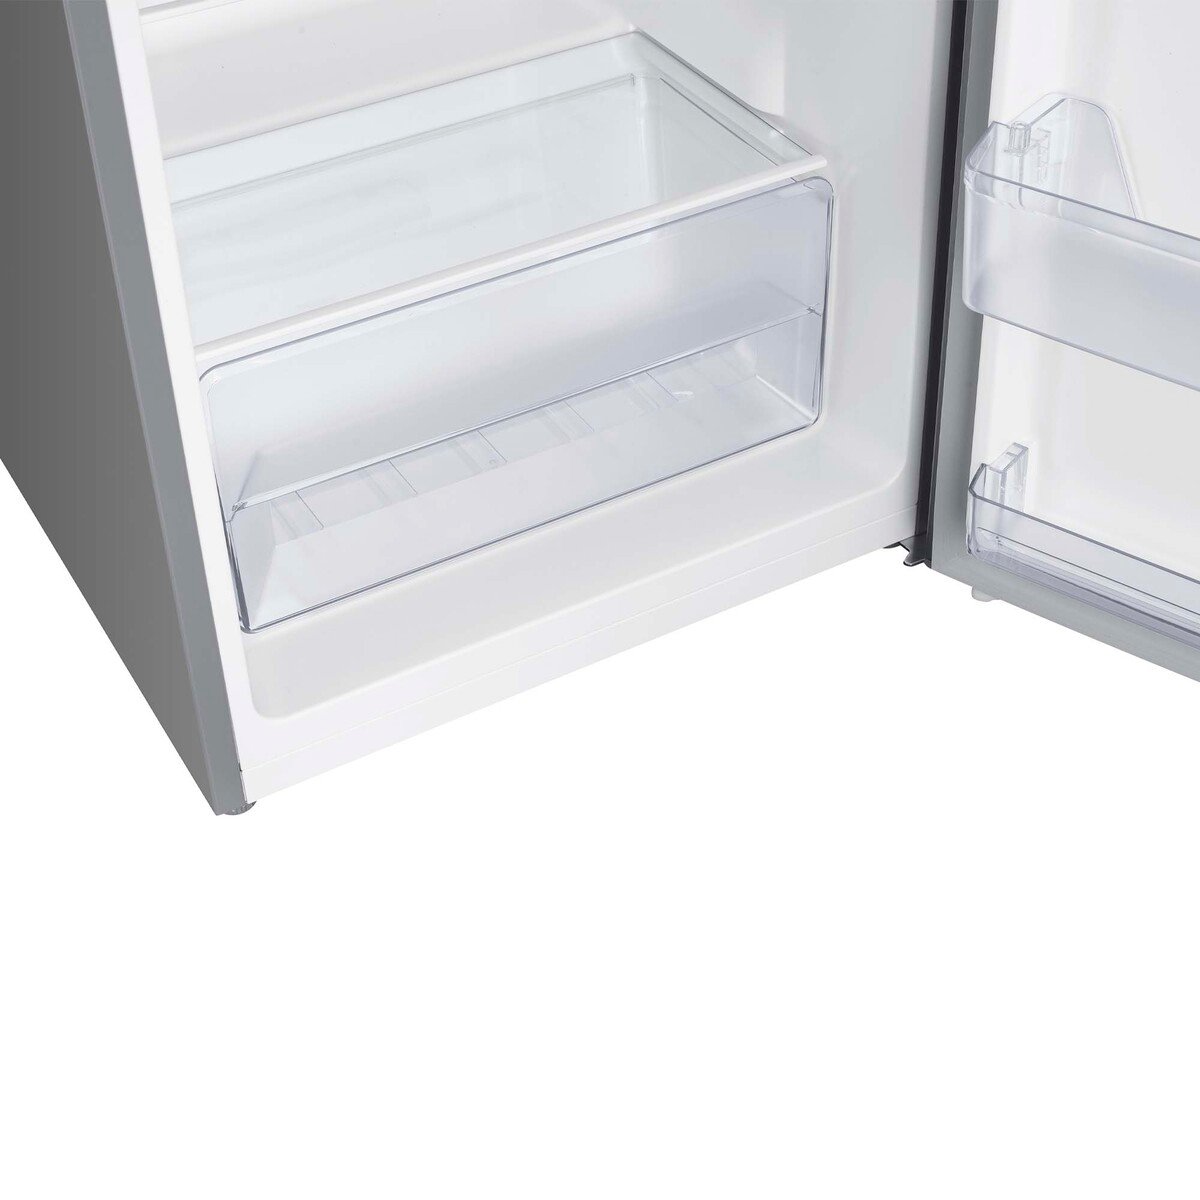 TCL Double Door Refrigerator, 256 L, Silver, P256TMS